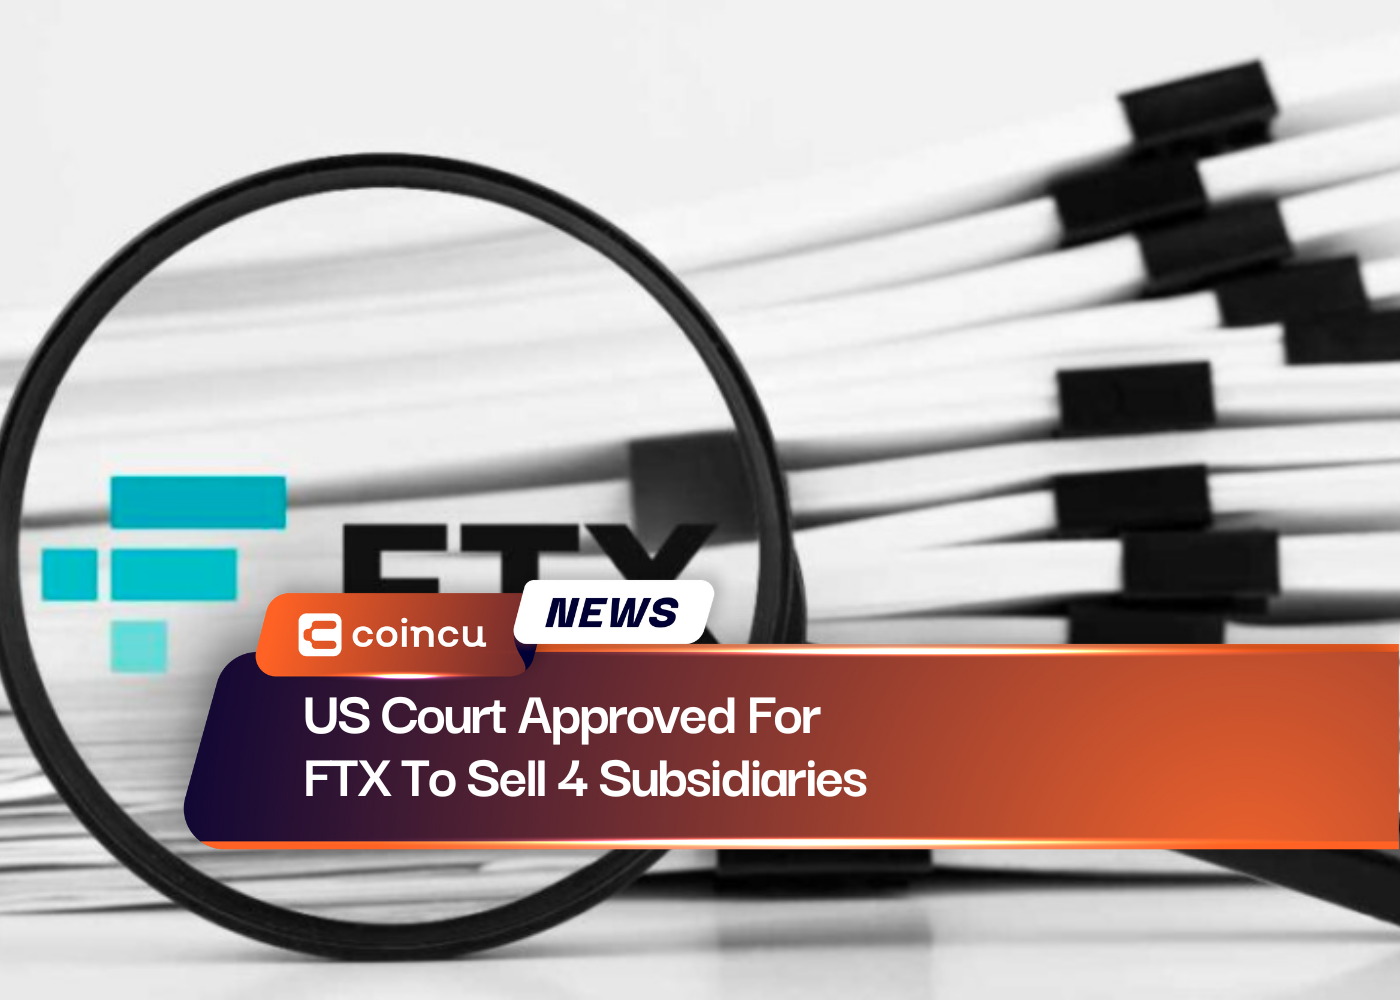 US Court Approved For FTX To Sell 4 Subsidiaries